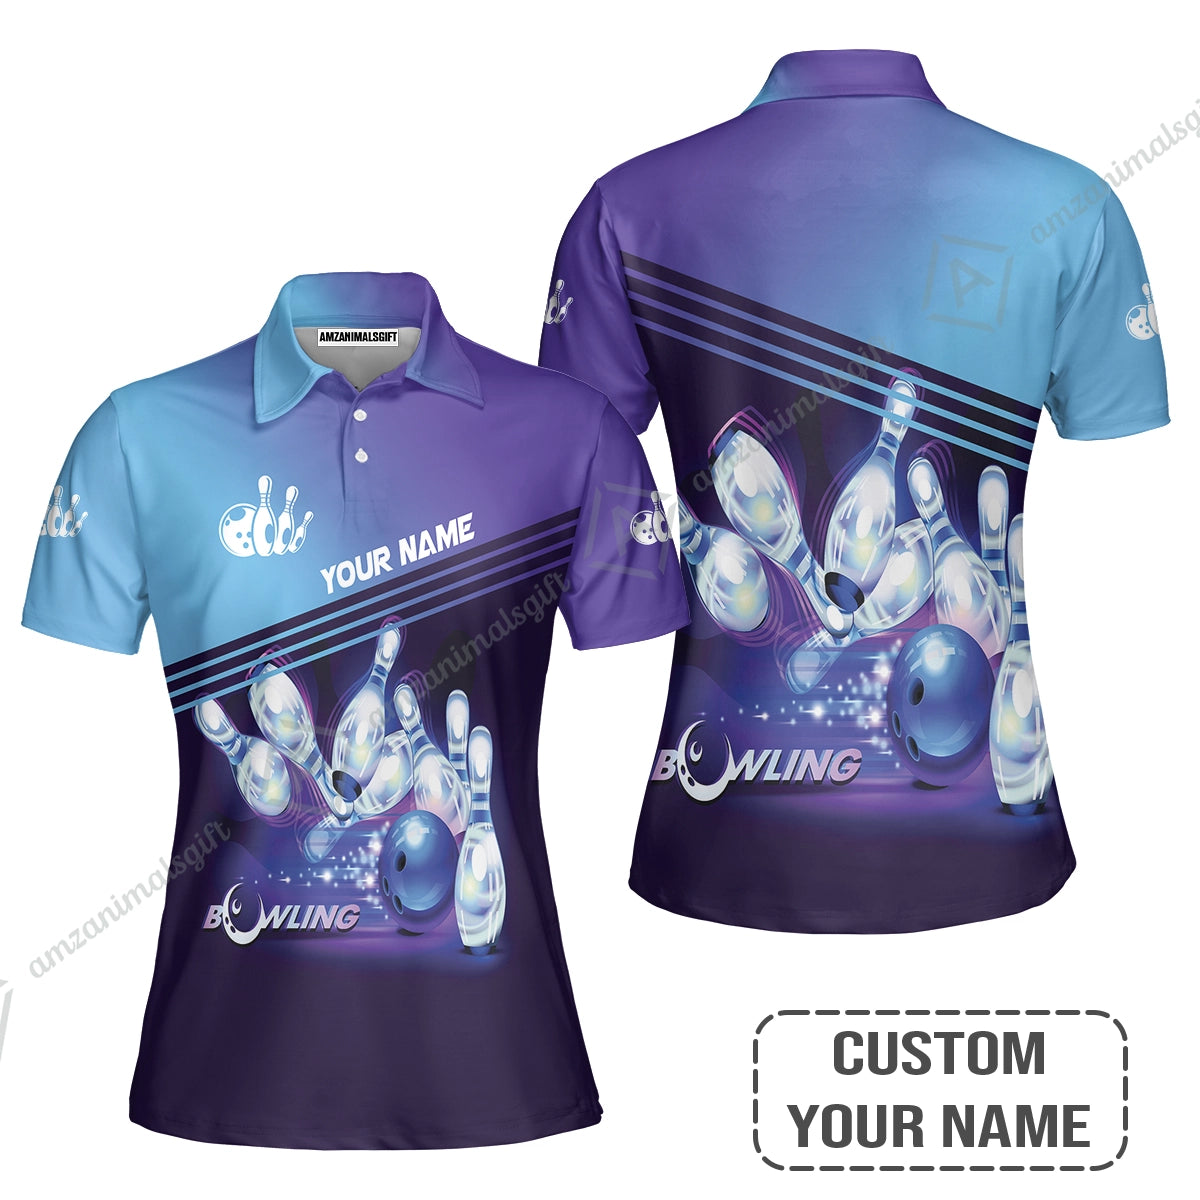 Bowling Women Polo Shirt With Custom Name, Personalized Blue Bowling Shirt Uniform Player, Best Gifts For Kids, Bowling Lovers, Bowlers